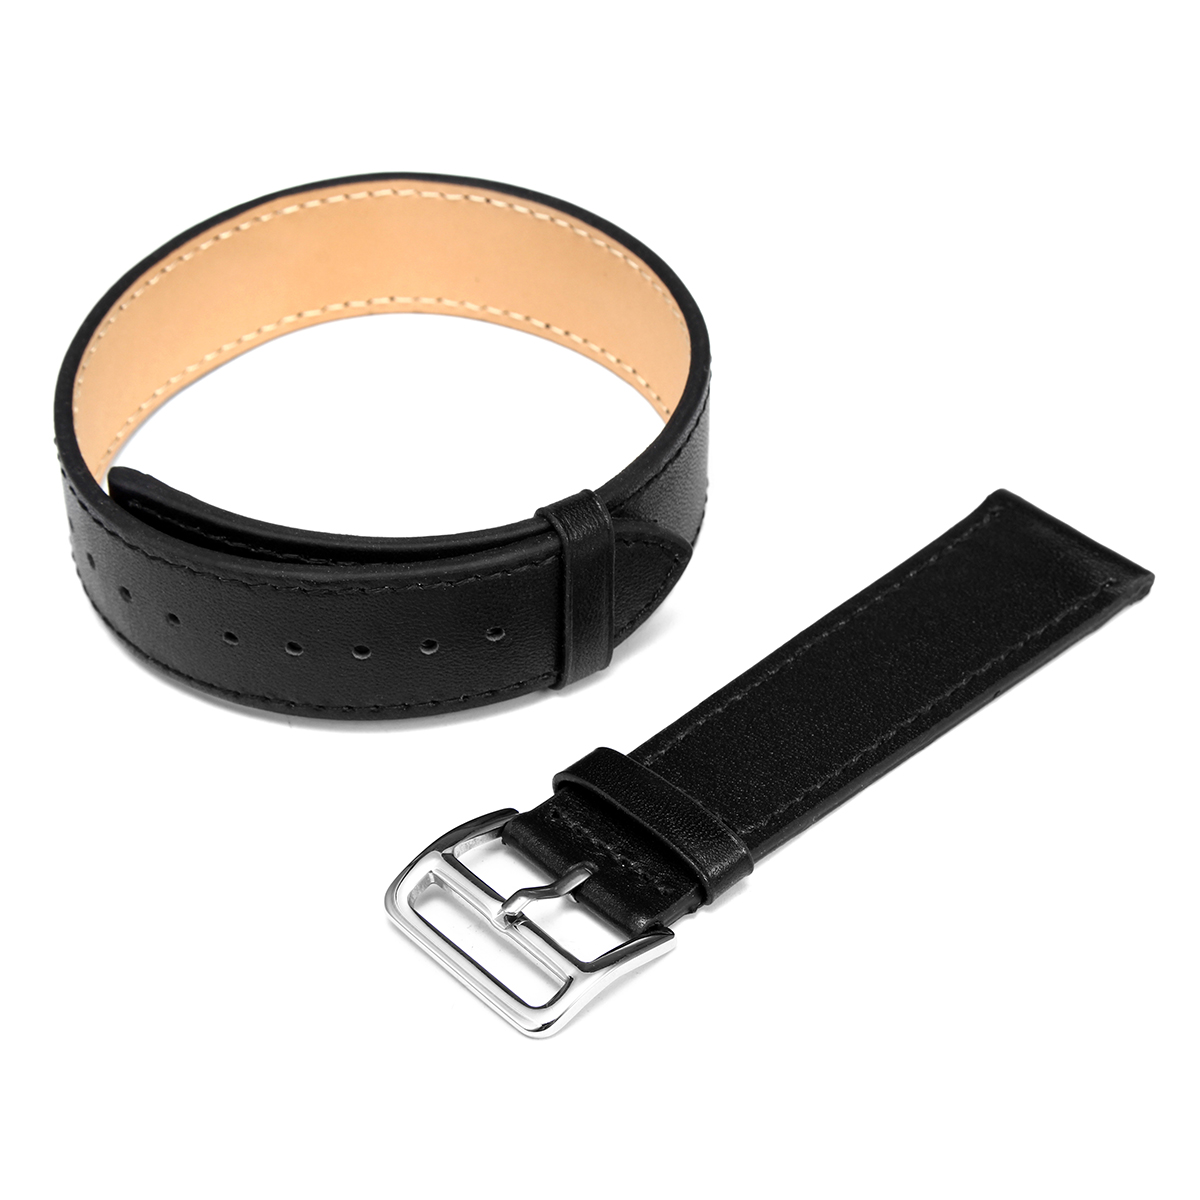 Genuine-Leather-Watch-Band-Strap-Replacement-For-Apple-Watch-Series-1-42mm-1306681-3